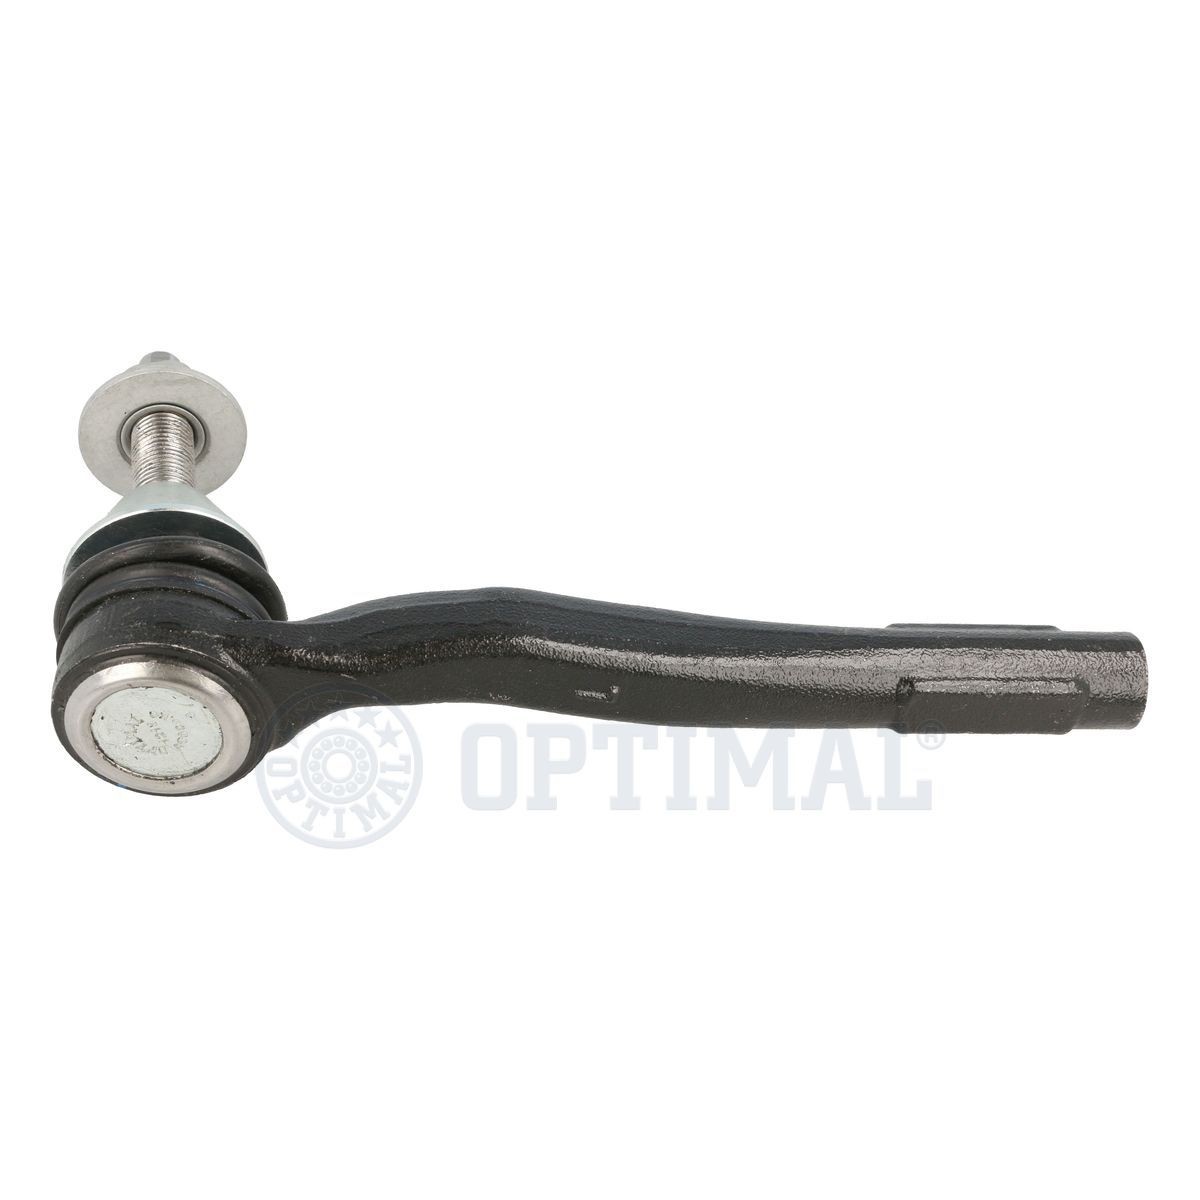 OPTIMAL Outer tie rod G1-1553 suitable for MERCEDES-BENZ C-Class, E-Class, CLS